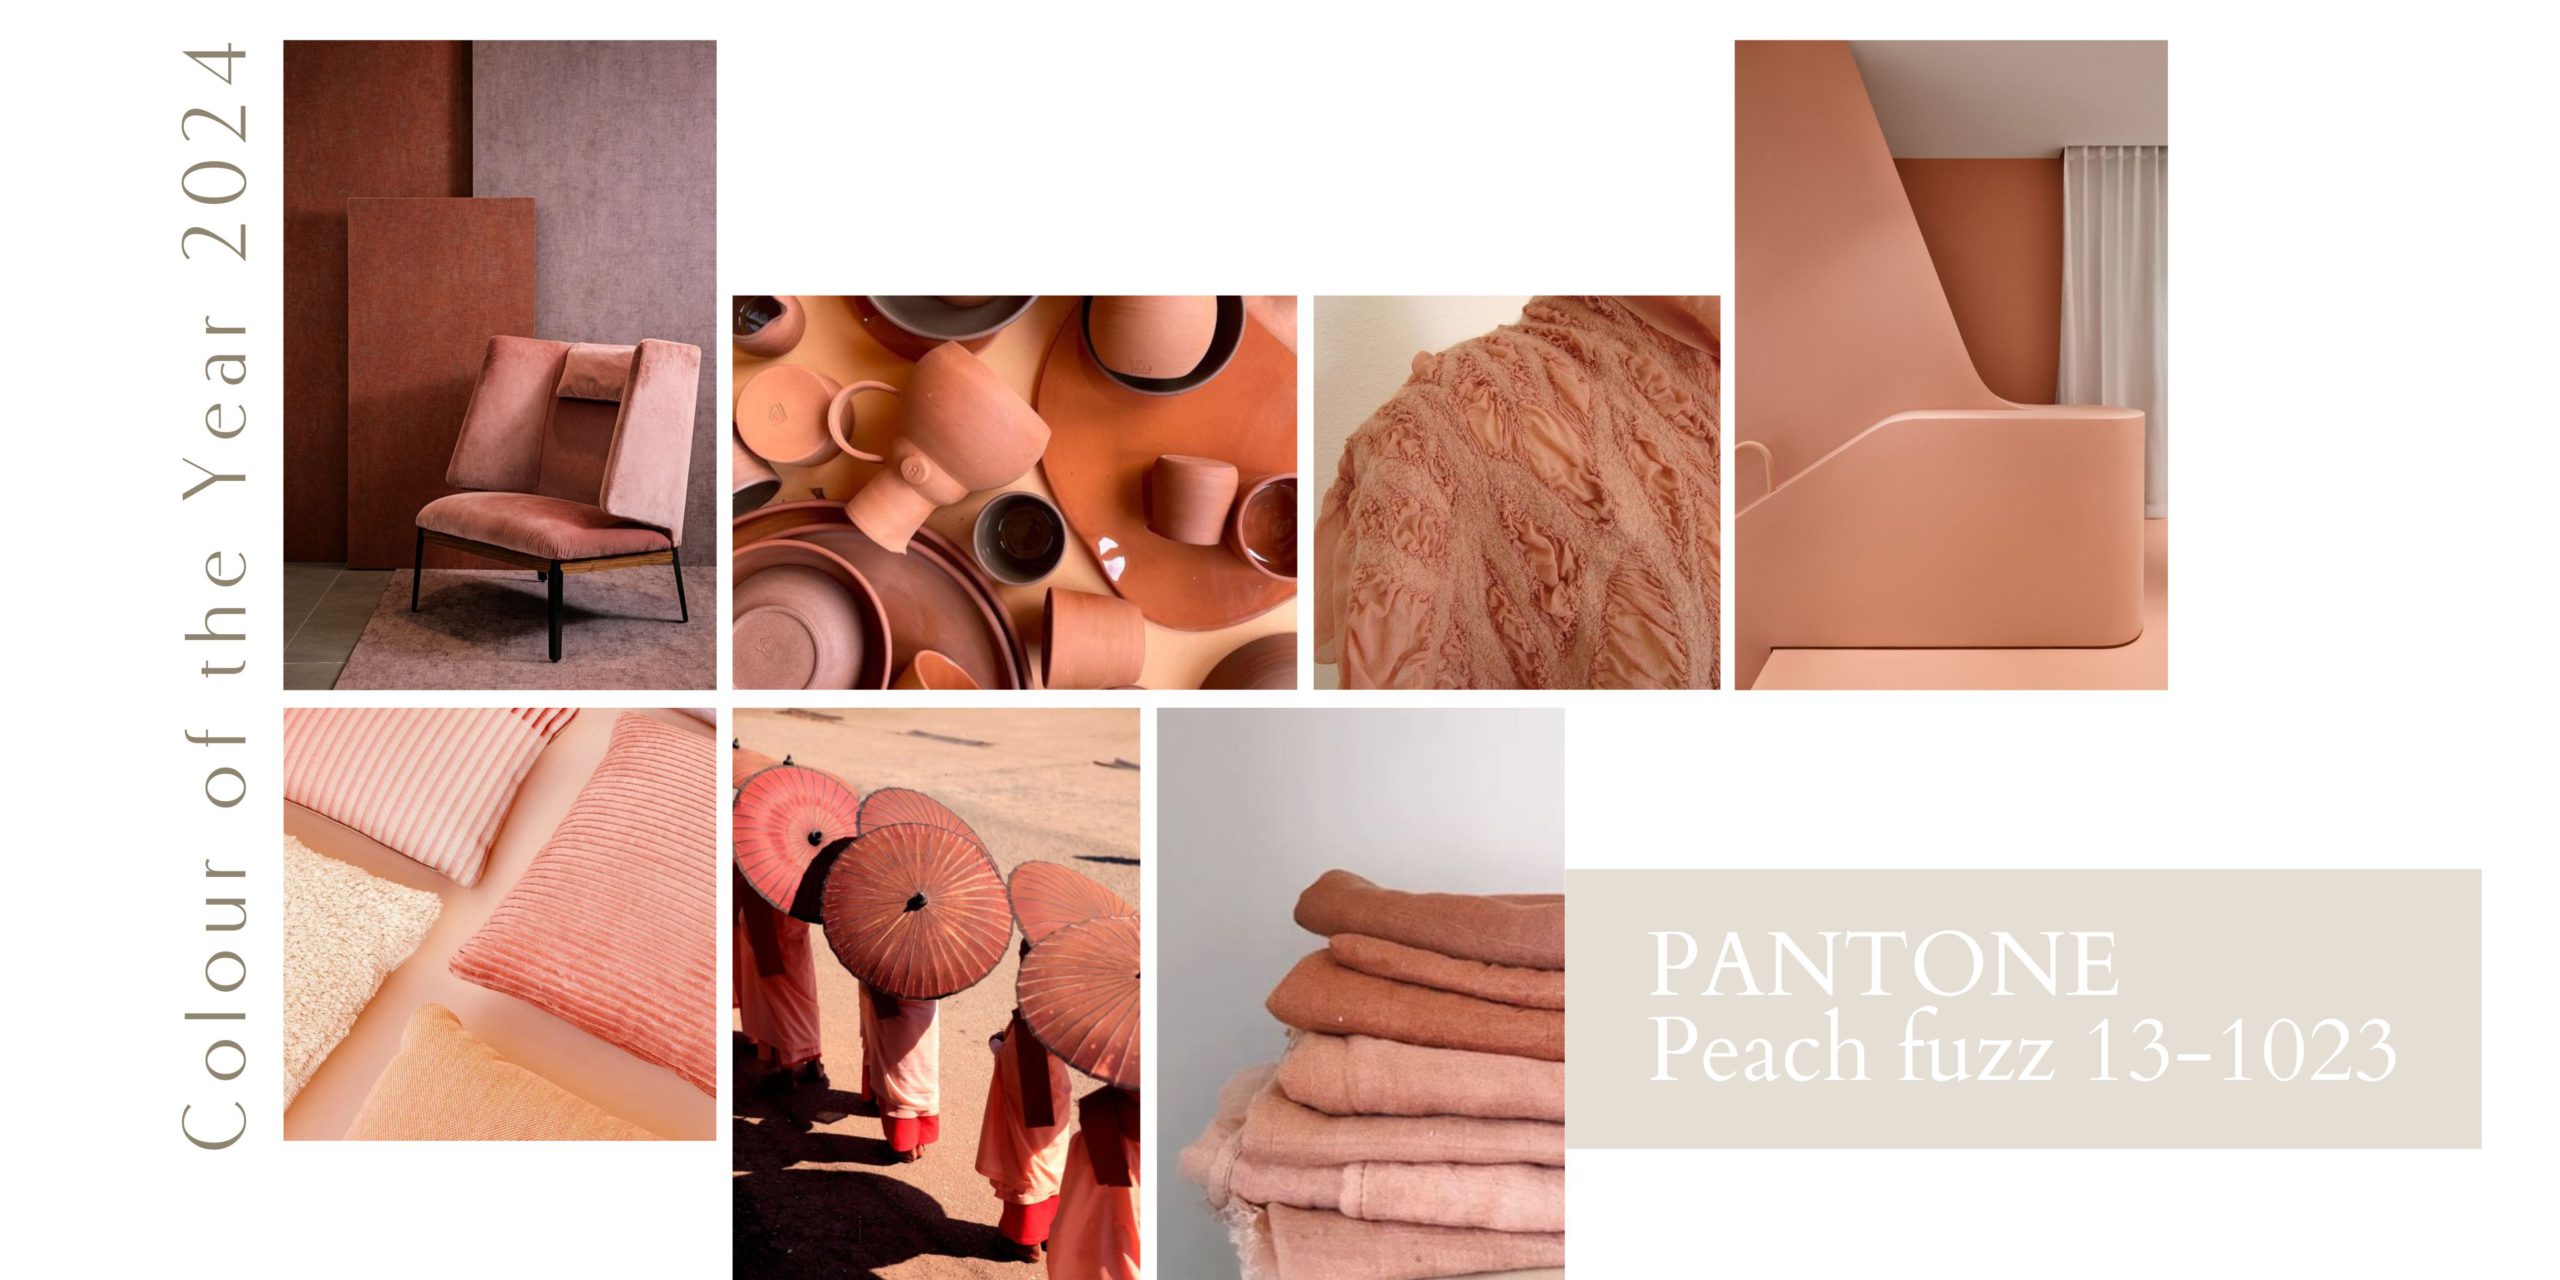 Pantone Color of the Year 2020: Peach - a warm, soft hue symbolizing optimism and tranquility